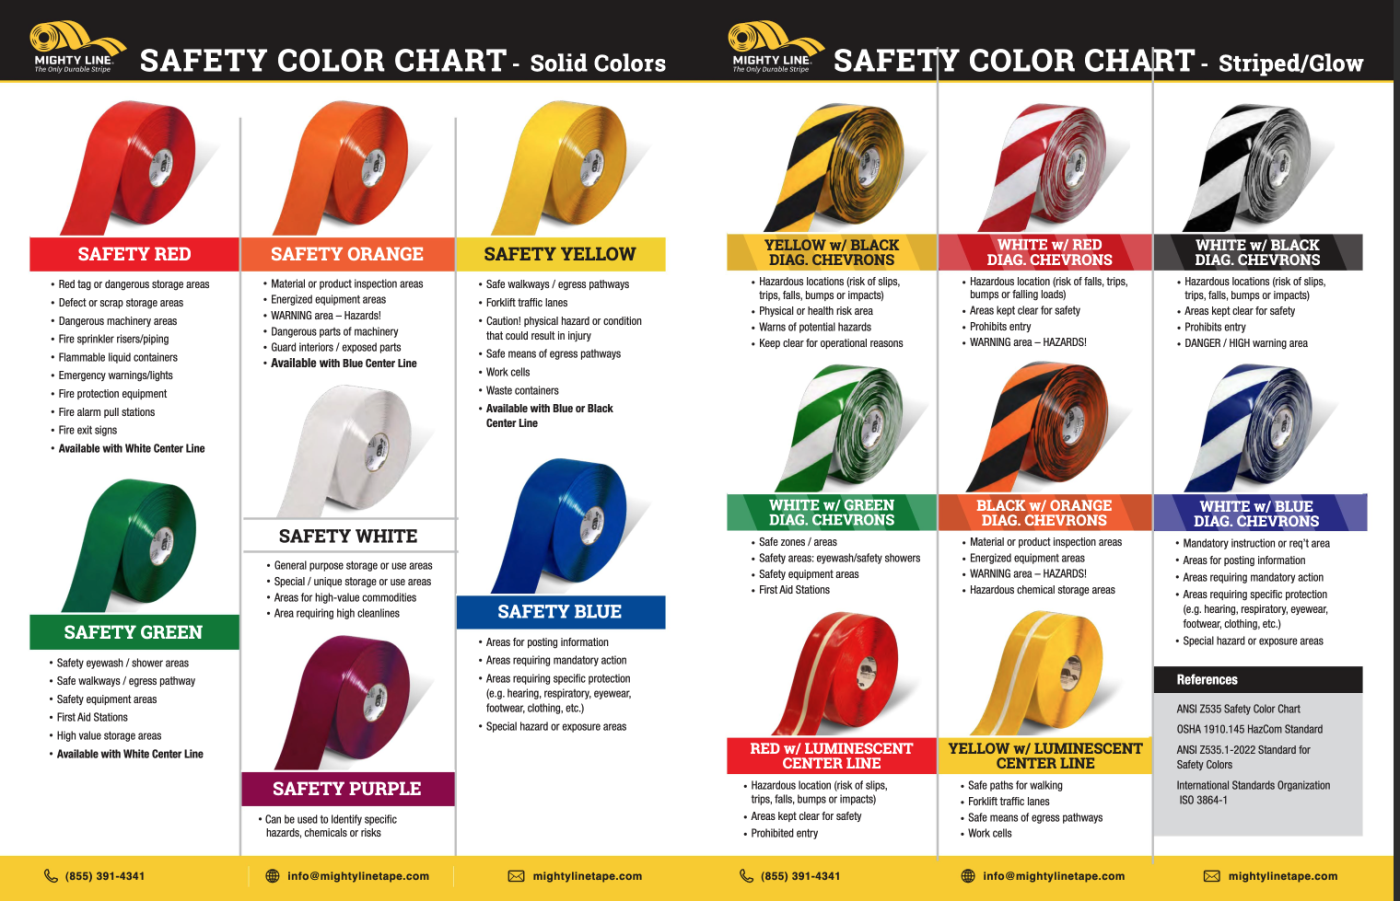 OSHA's Safety Colors Guide - Mighty Line Minute Ep. 11